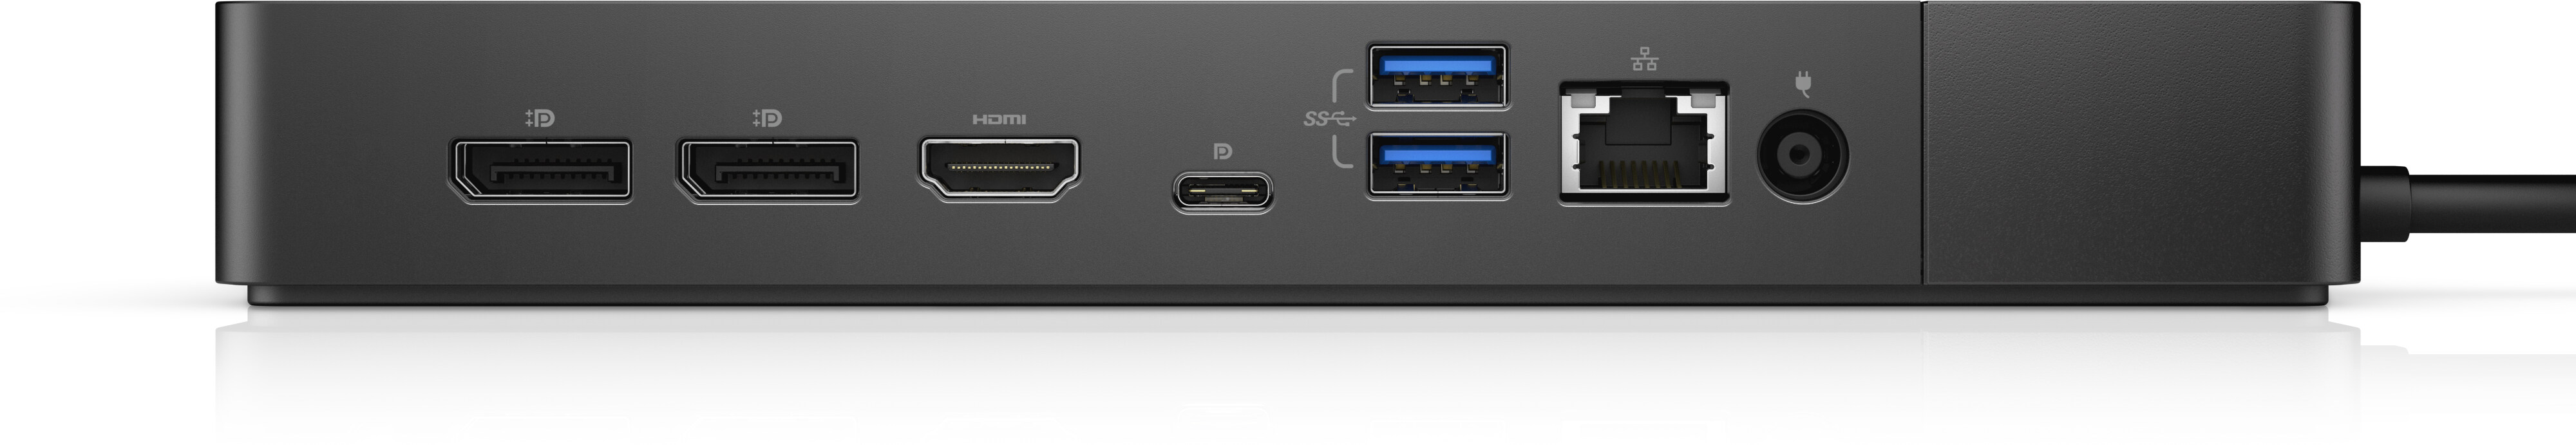 Station d'accueil Dell Performance Dock - WD19DCS